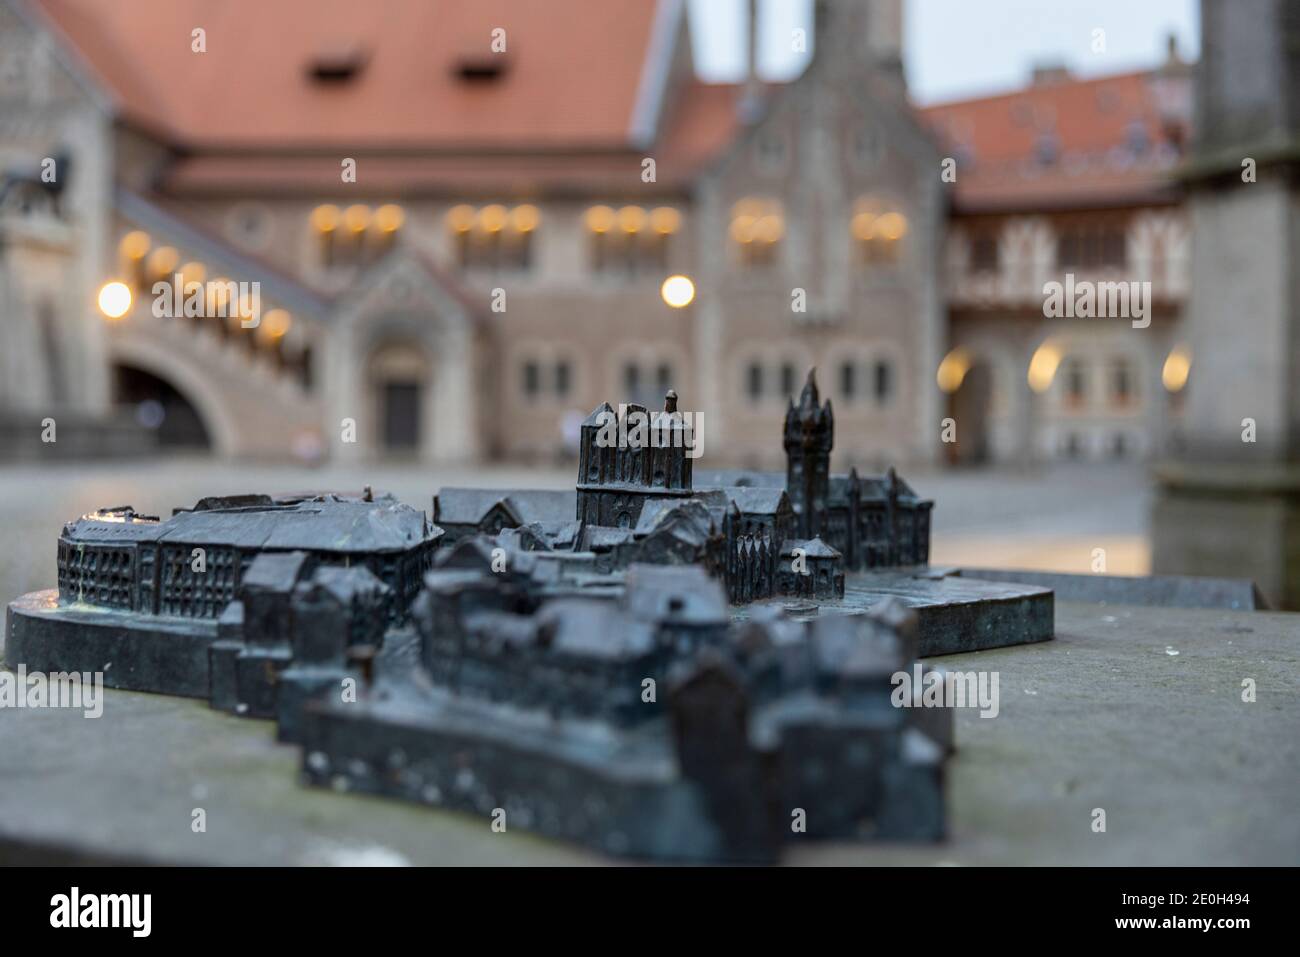 Many German old towns have scale models in bronze of town center. That gives tourists a view of their surroundings. Stock Photo